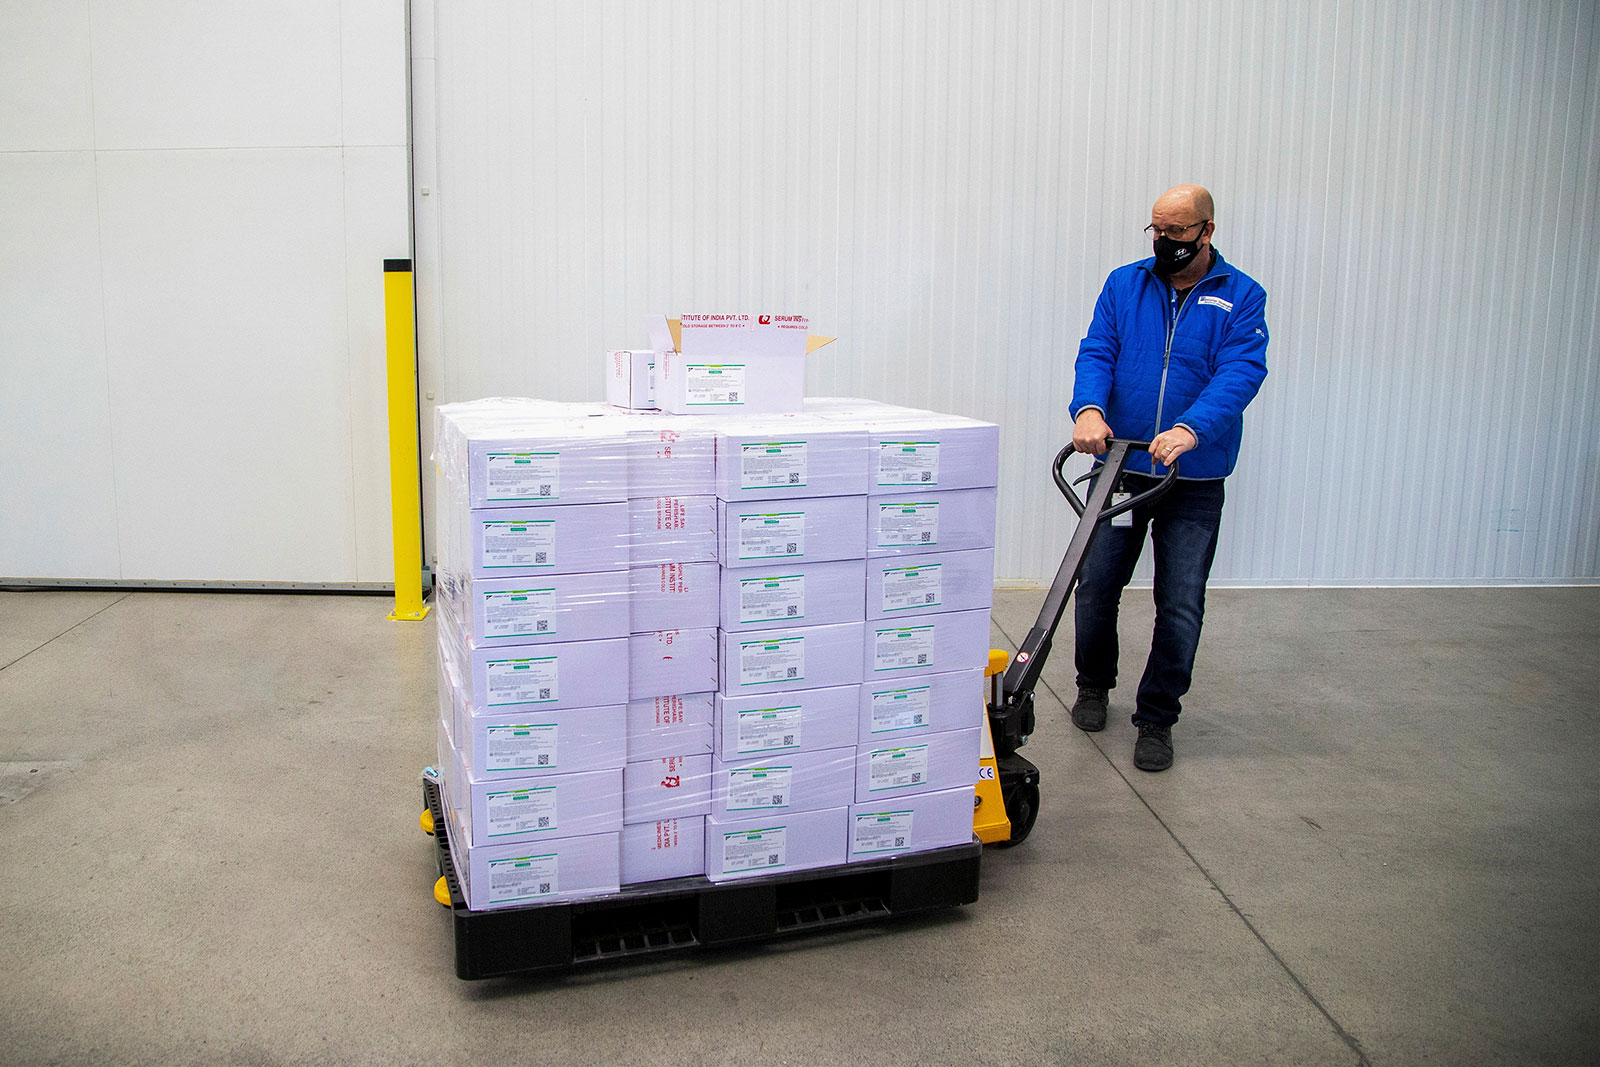 Michael Gray moves a pallet of AstraZeneca Covid-19 vaccine doses in Ontario, Canada, on March 3.